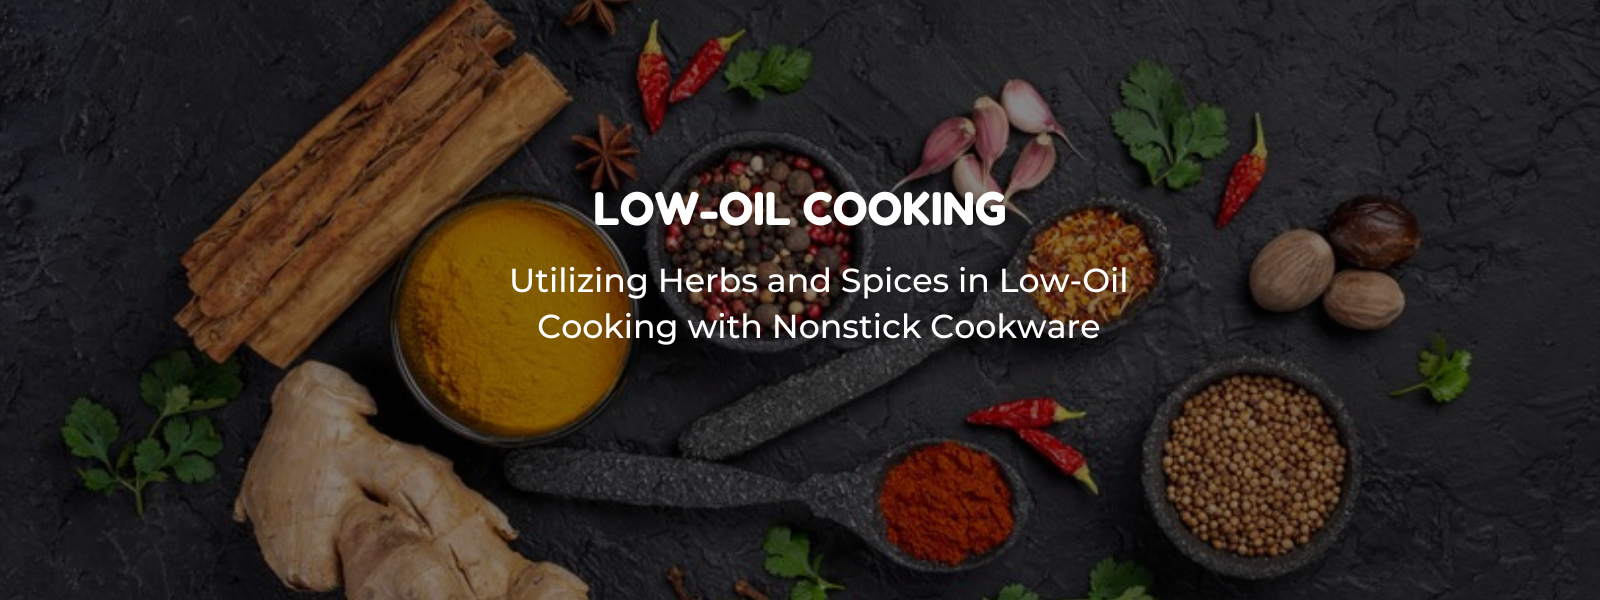 Utilizing Herbs and Spices in Low-Oil Cooking with Nonstick Cookware